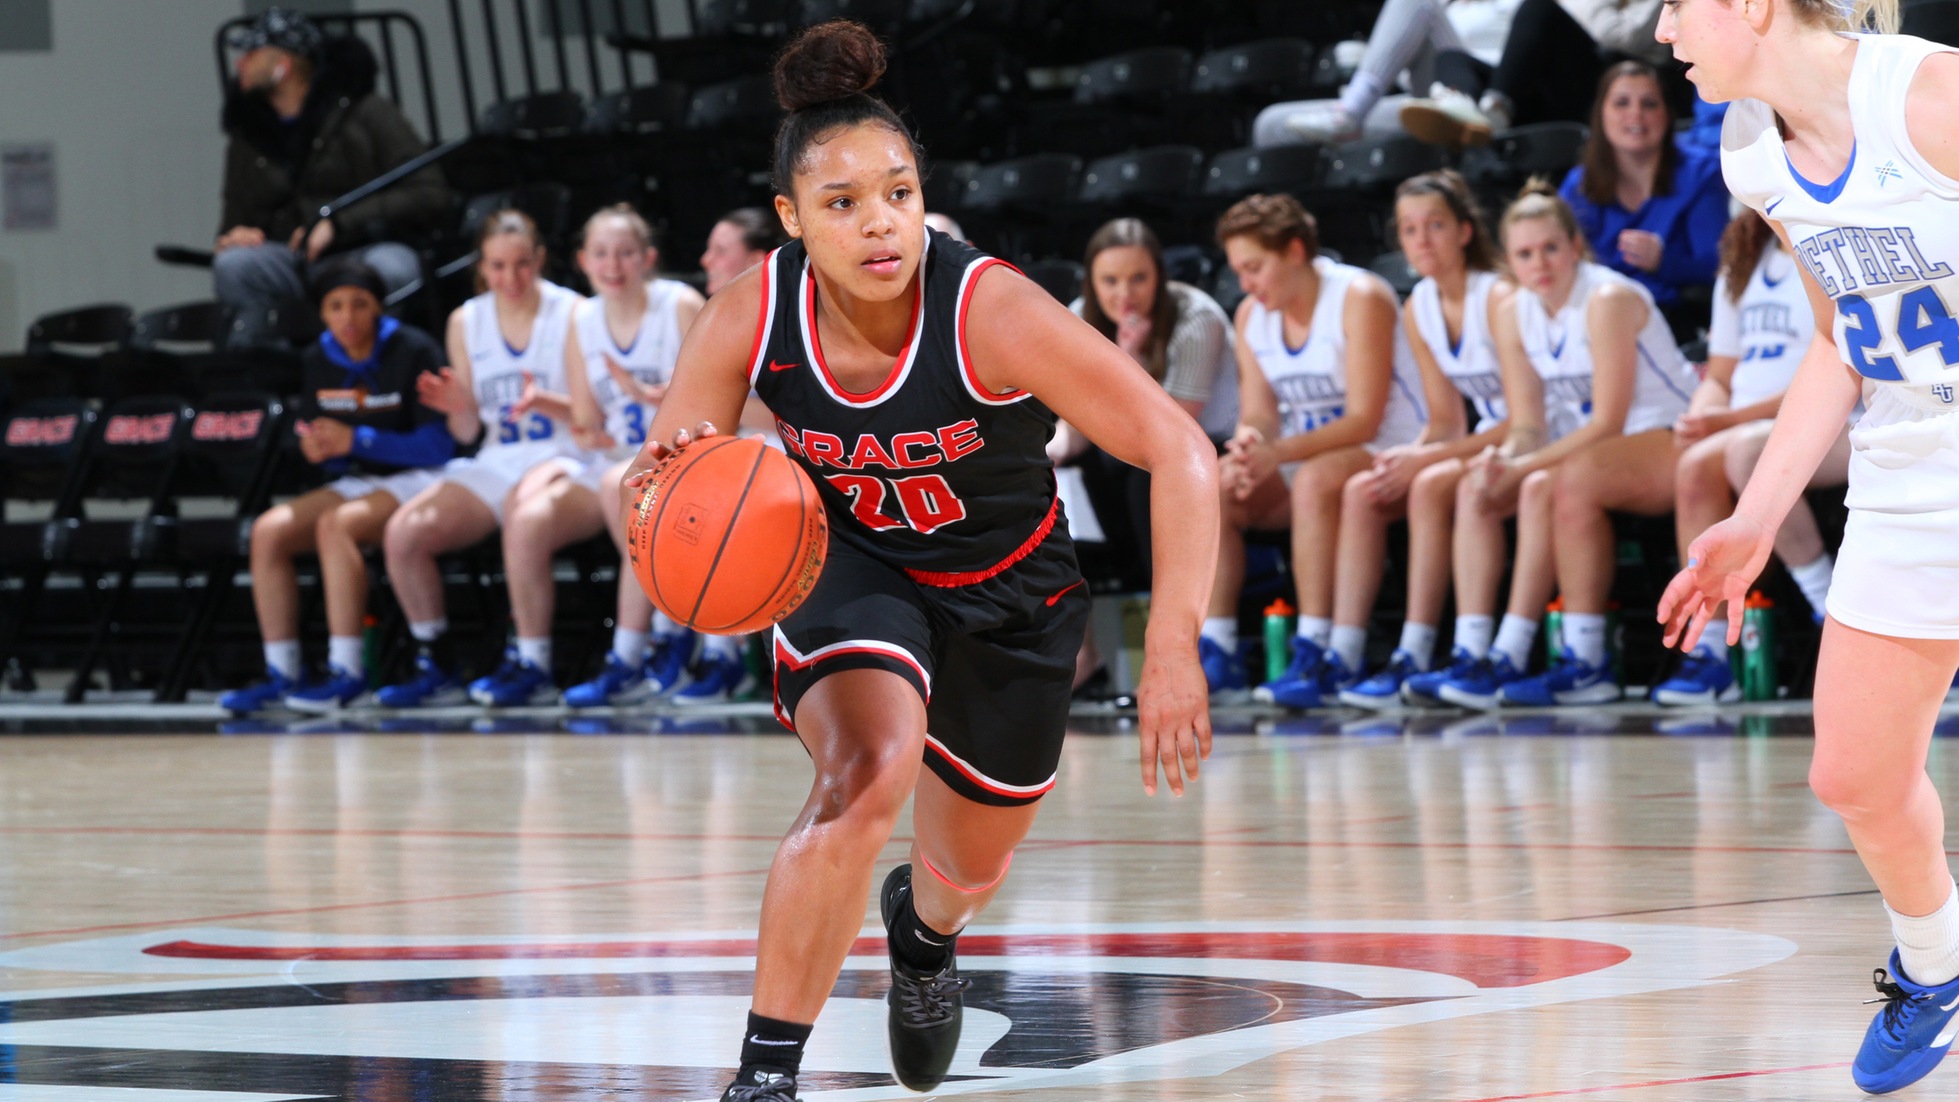 NAIA Division II Women's Basketball National Player of the Week - No. 9